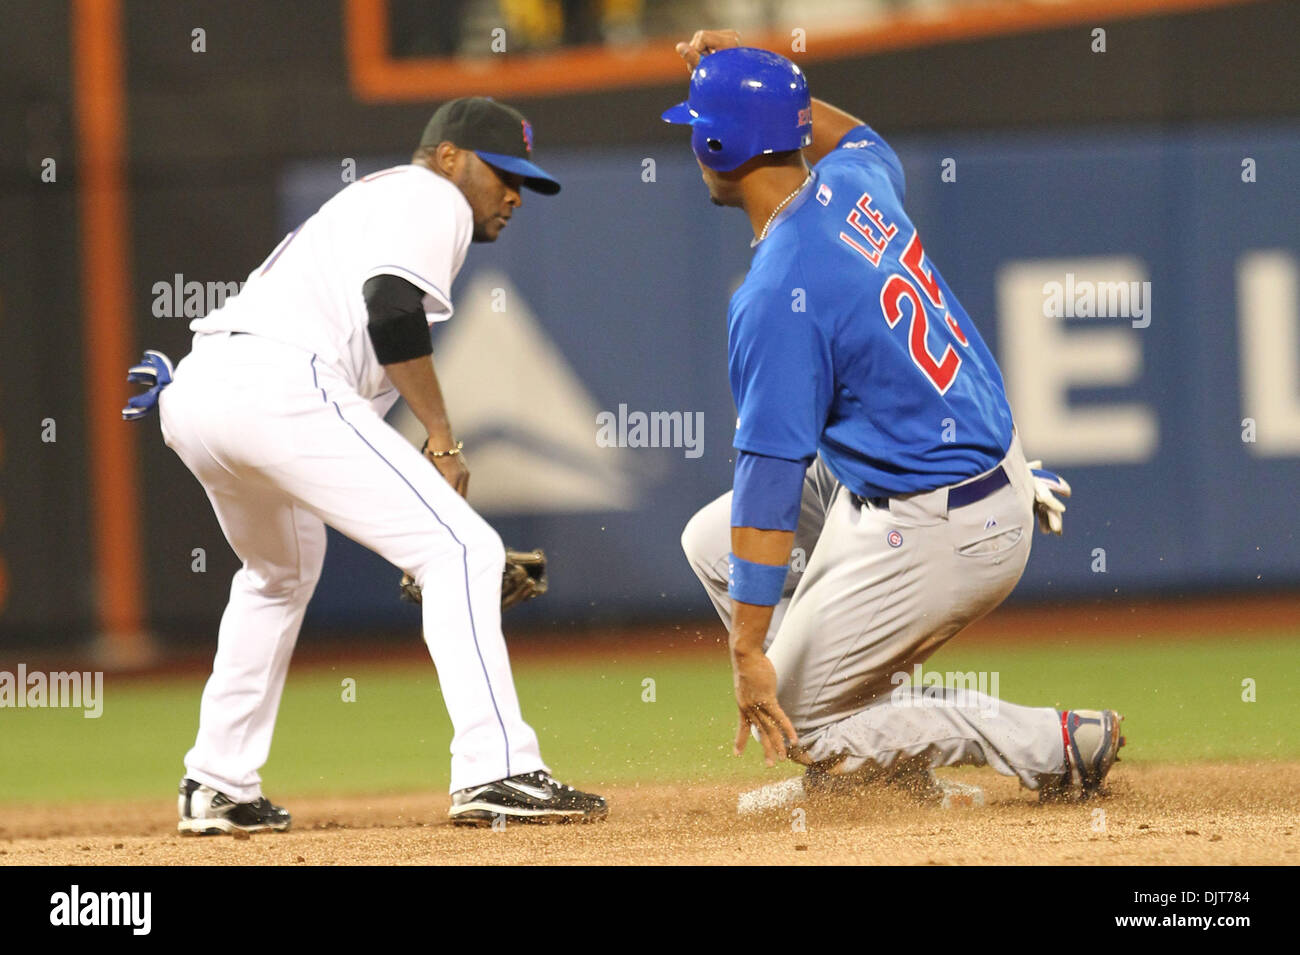 Chicago Cubs Infielder Derrek Lee  (#25) safe at 2nd while NY Mets Infielder Luis Castillo  (#1) waits for the ball. The Cubs defeated the Mets 9-3 in the game at Citifield, Flushing, NY. (Credit Image: © Anthony Gruppuso/Southcreek Global/ZUMApress.com) Stock Photo